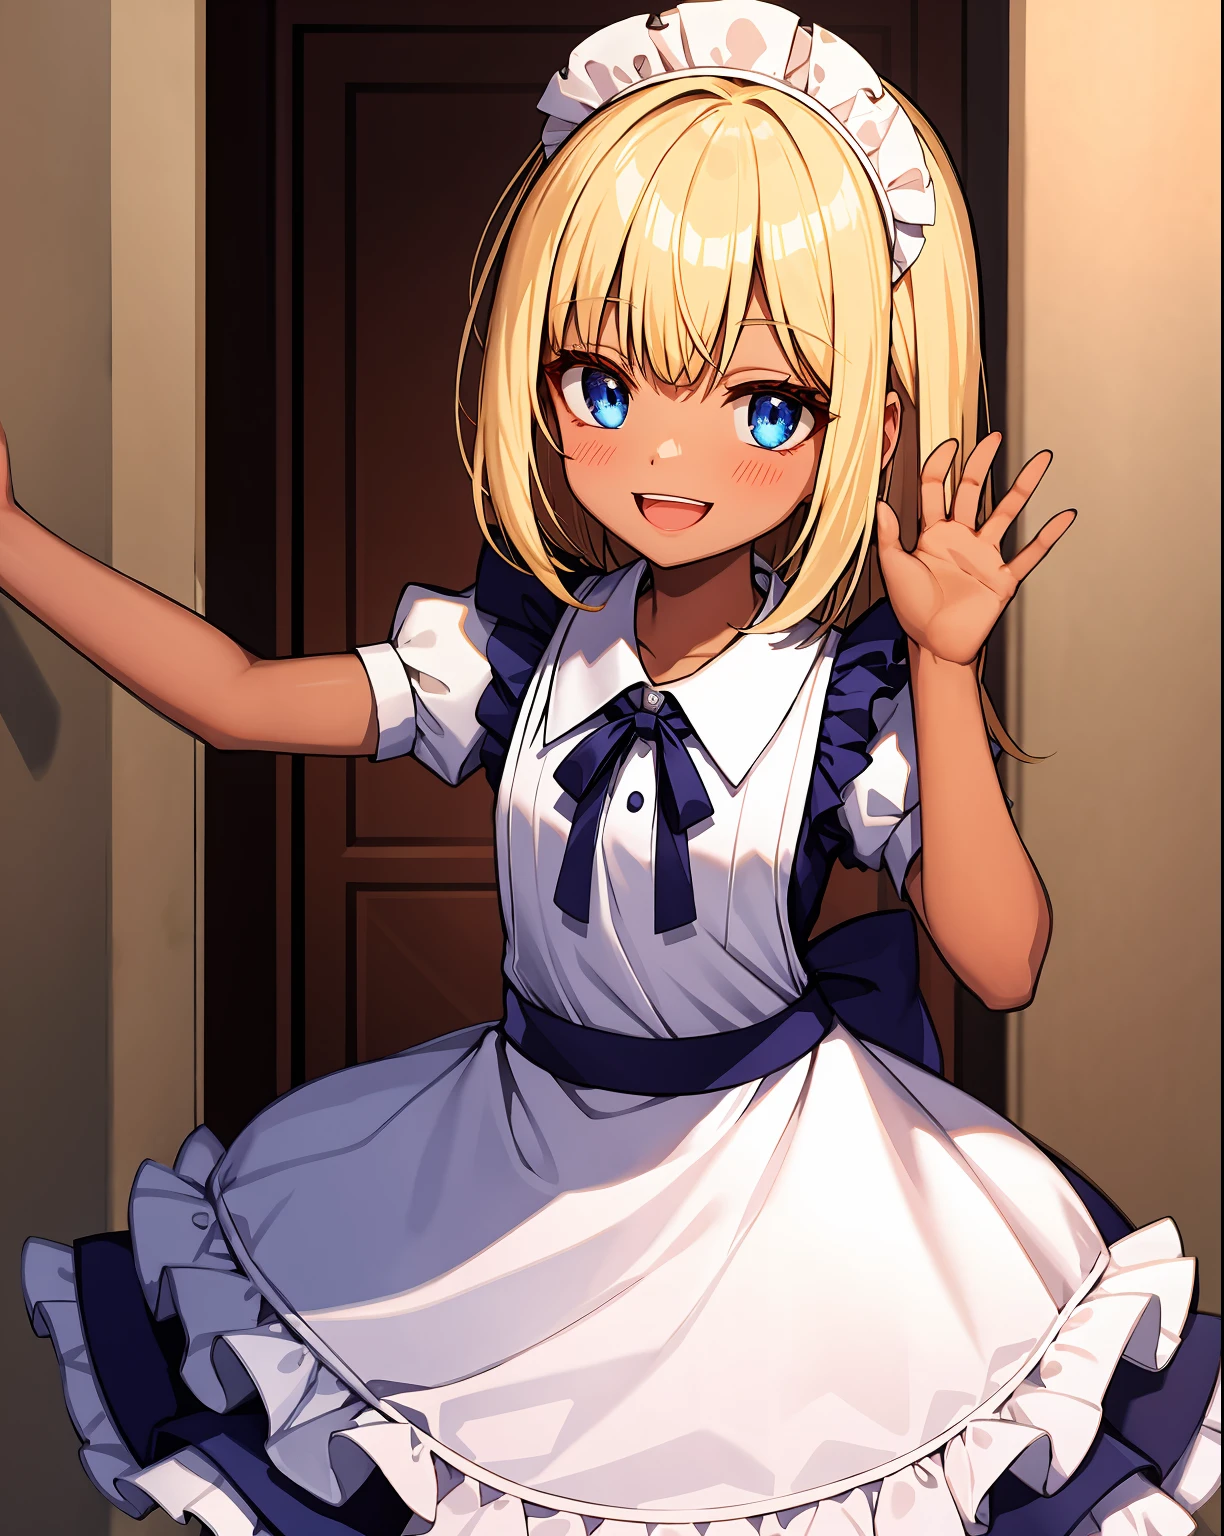 A maid, looking upwoards, blonde hair, tan skin, happy, smiling, flat chest, POV